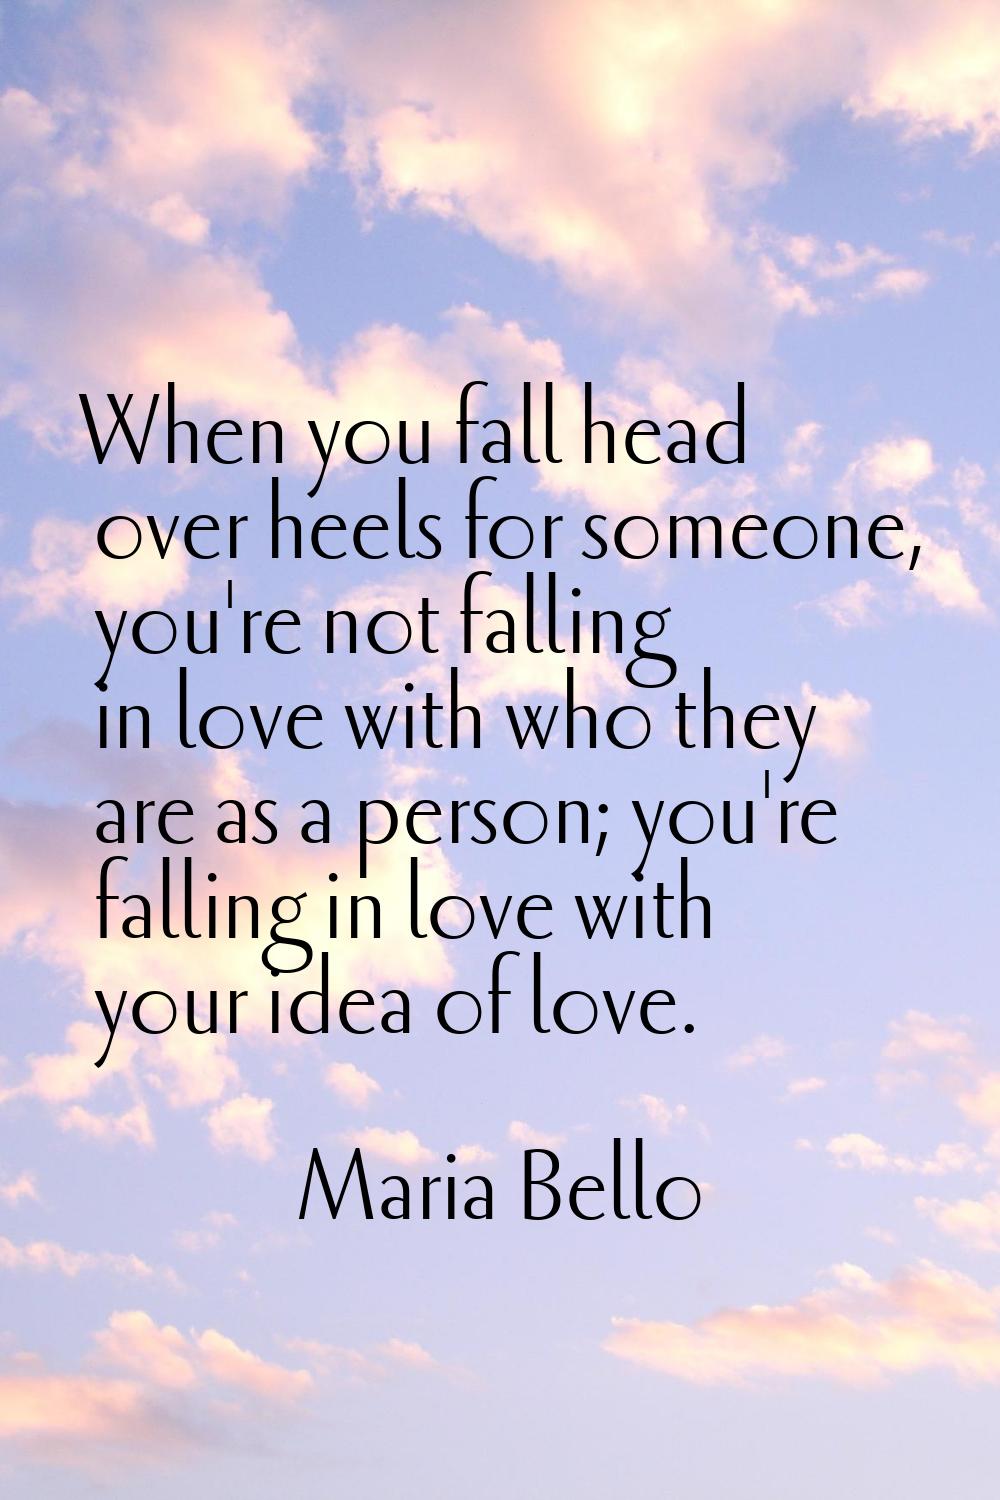 When you fall head over heels for someone, you're not falling in love with who they are as a person